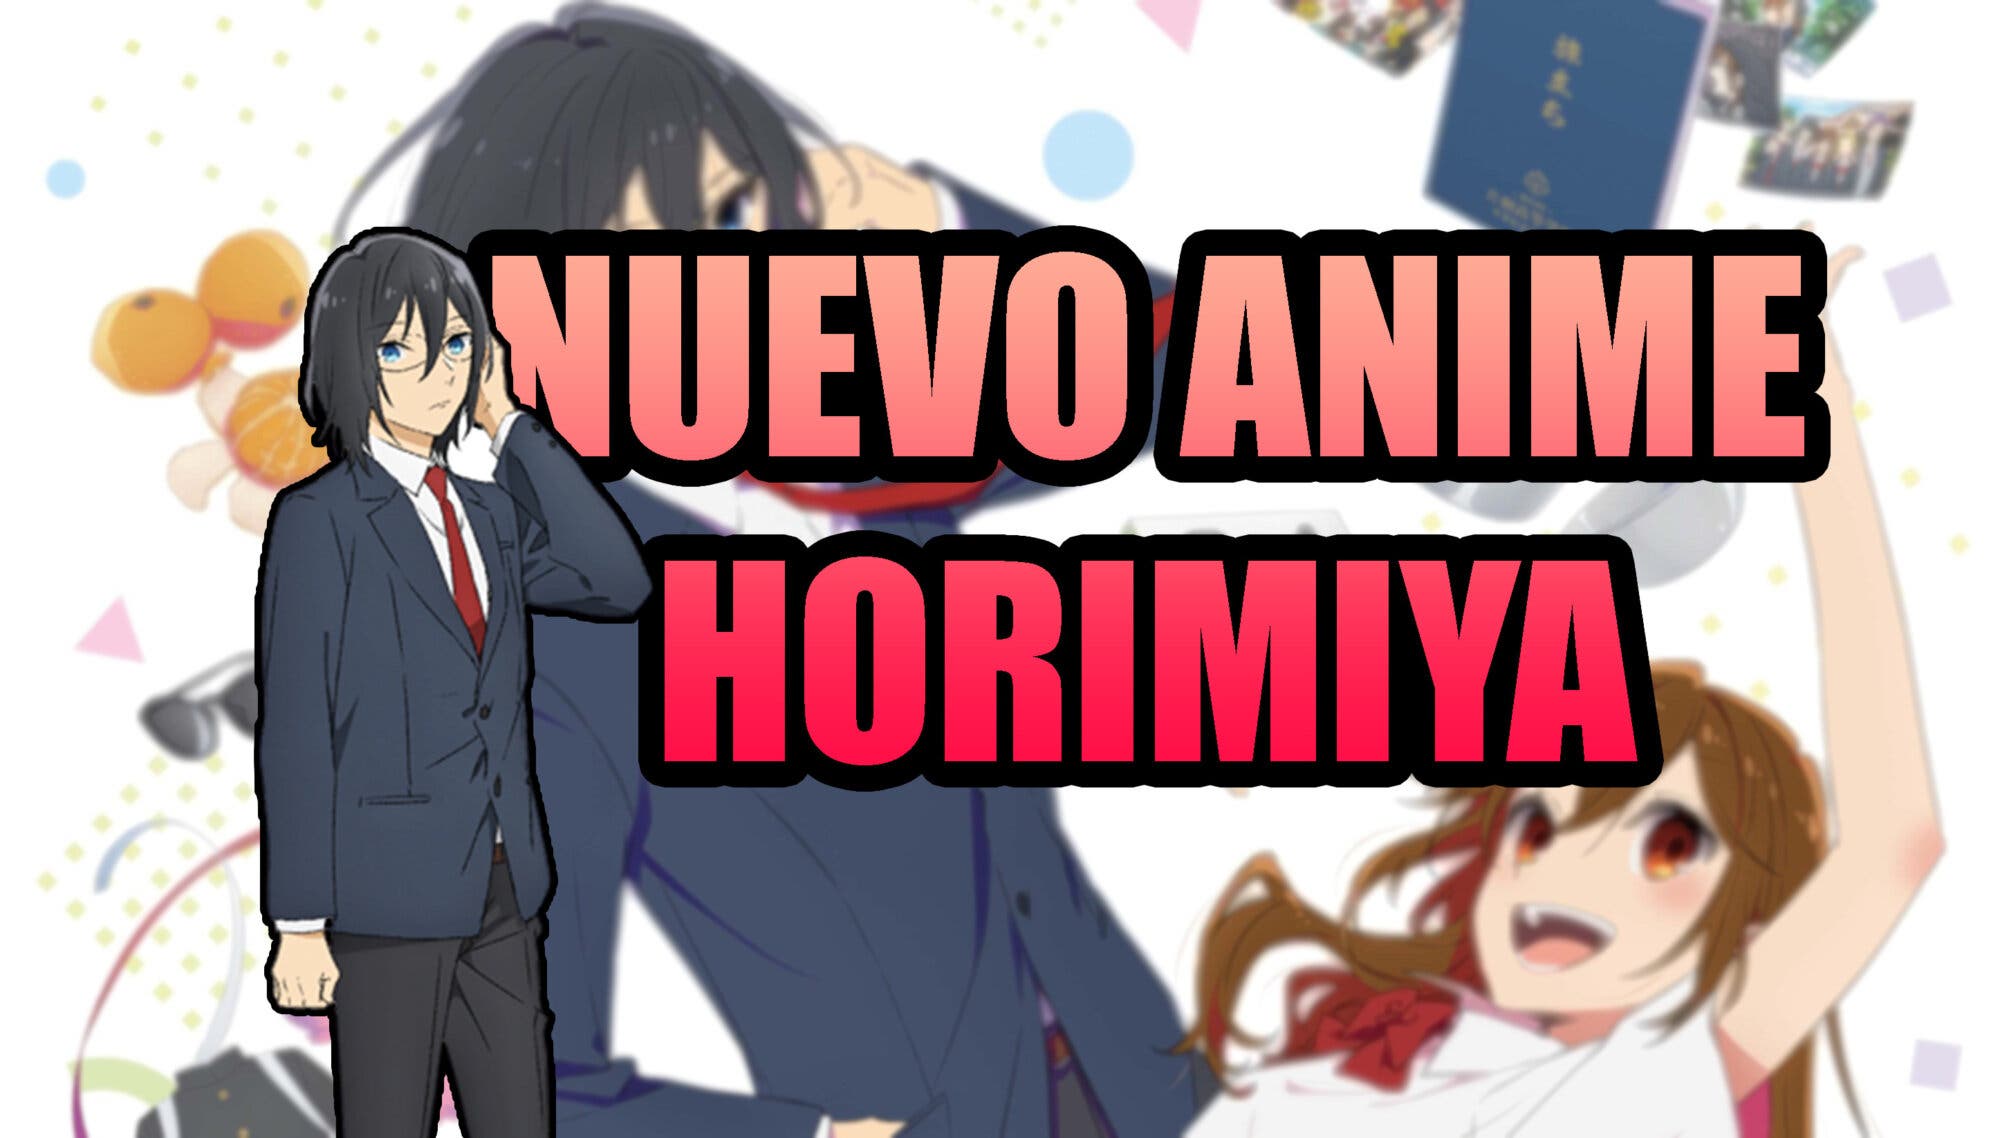 Horimiya will have a new anime that will adapt more material from the manga